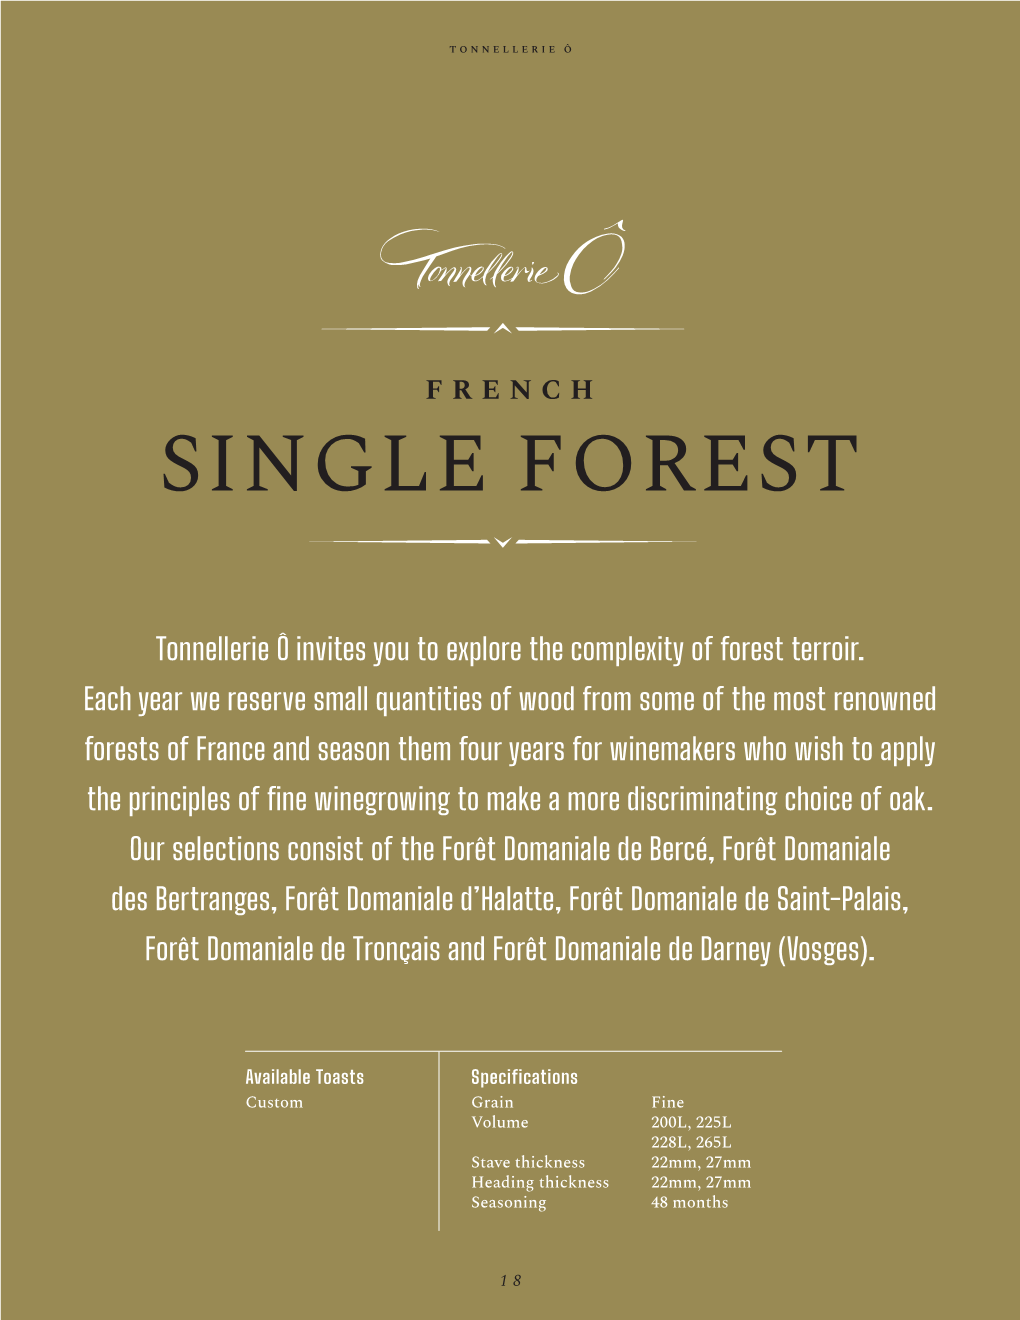 Single Forest